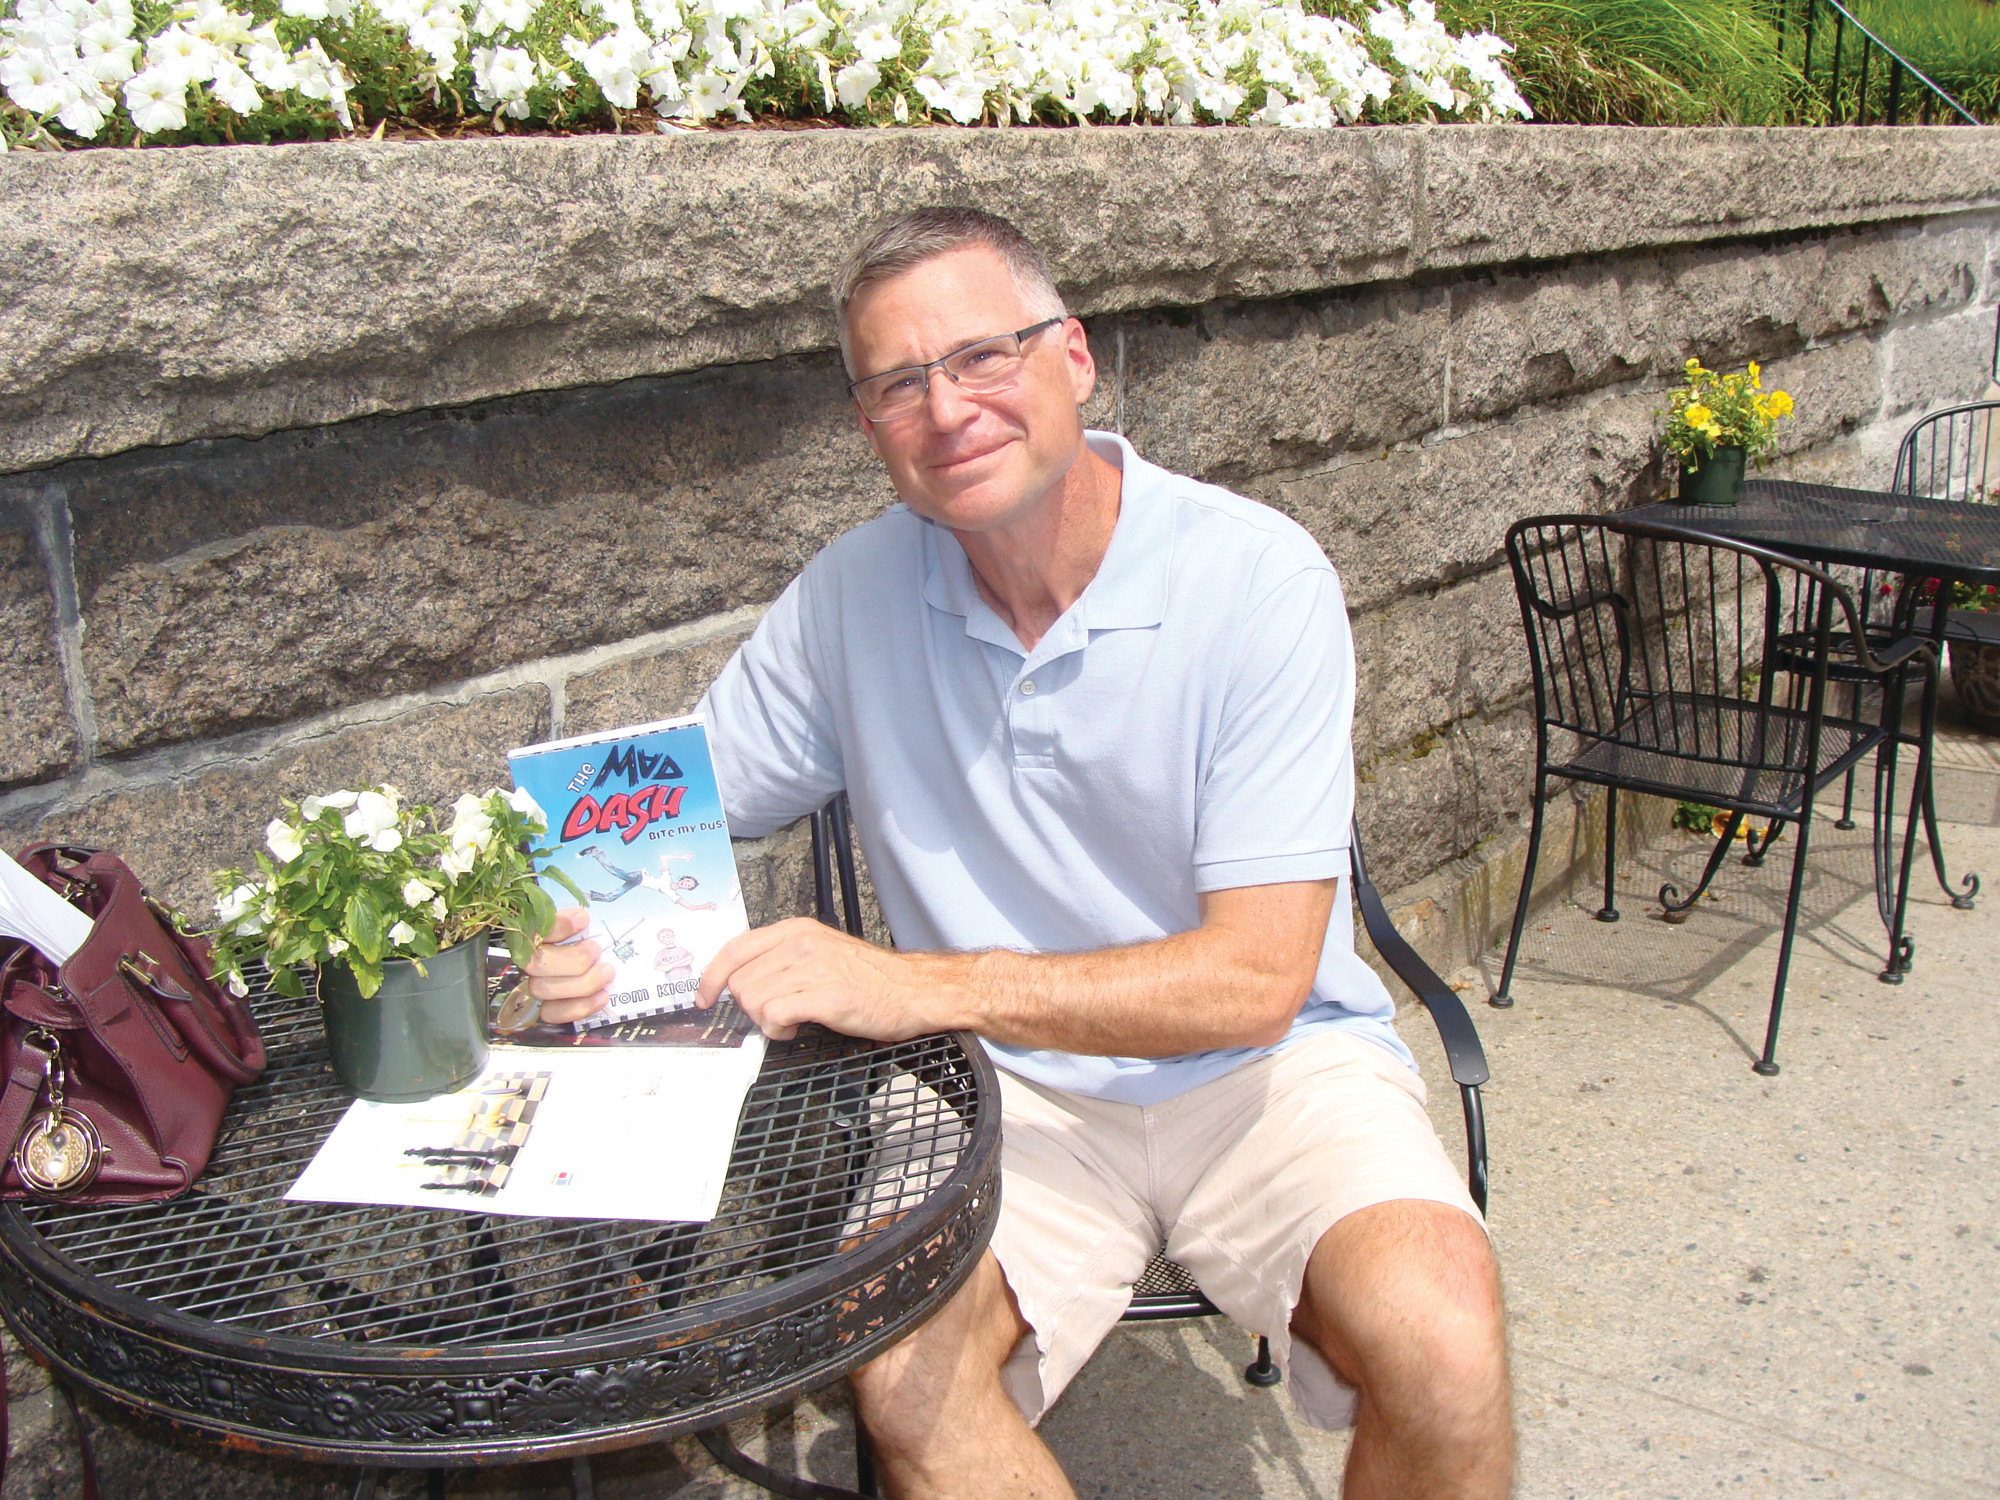 KID AT HEART: New author Tom Kiernan just released his first publication The Mad Dash: Bite My Dust, earlier this month. The novel is geared towards middle schoolers. Because Kiernan is a “kid at heart,” he felt he could easily connect with younger readers.